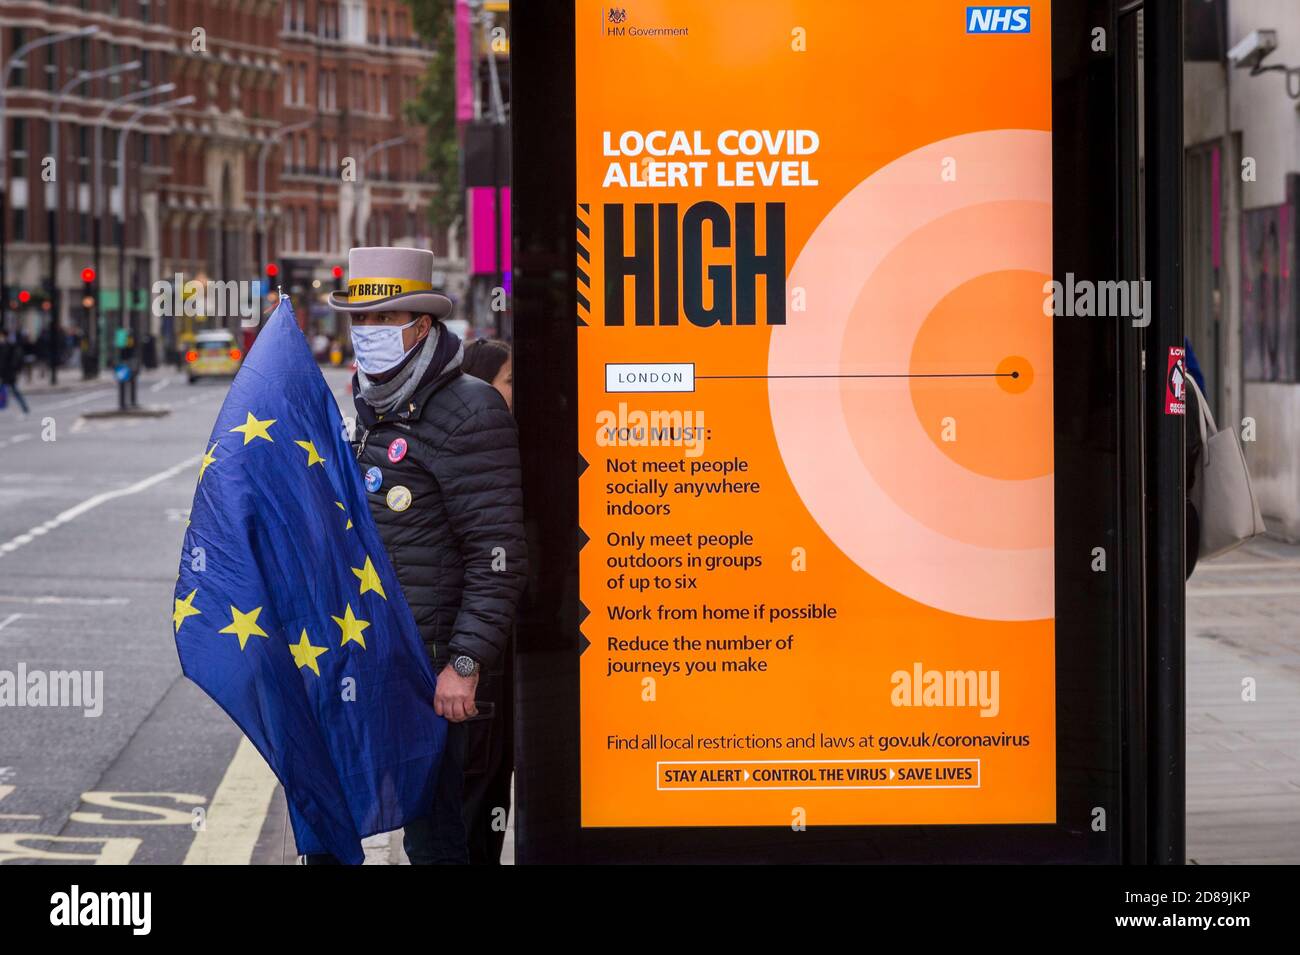 London, UK.  28 October 2020.  Steve Bray, an anti-Brexit protester from SODEM next to a Covid-19 alert related sign at a bus stop outside the Department for Business, Energy & Industrial Strategy in Westminster.  Michel Barnier, the European Commission's Head of Task Force for Relations with the United Kingdom, is attending meetings inside.  Credit: Stephen Chung / Alamy Live News Stock Photo